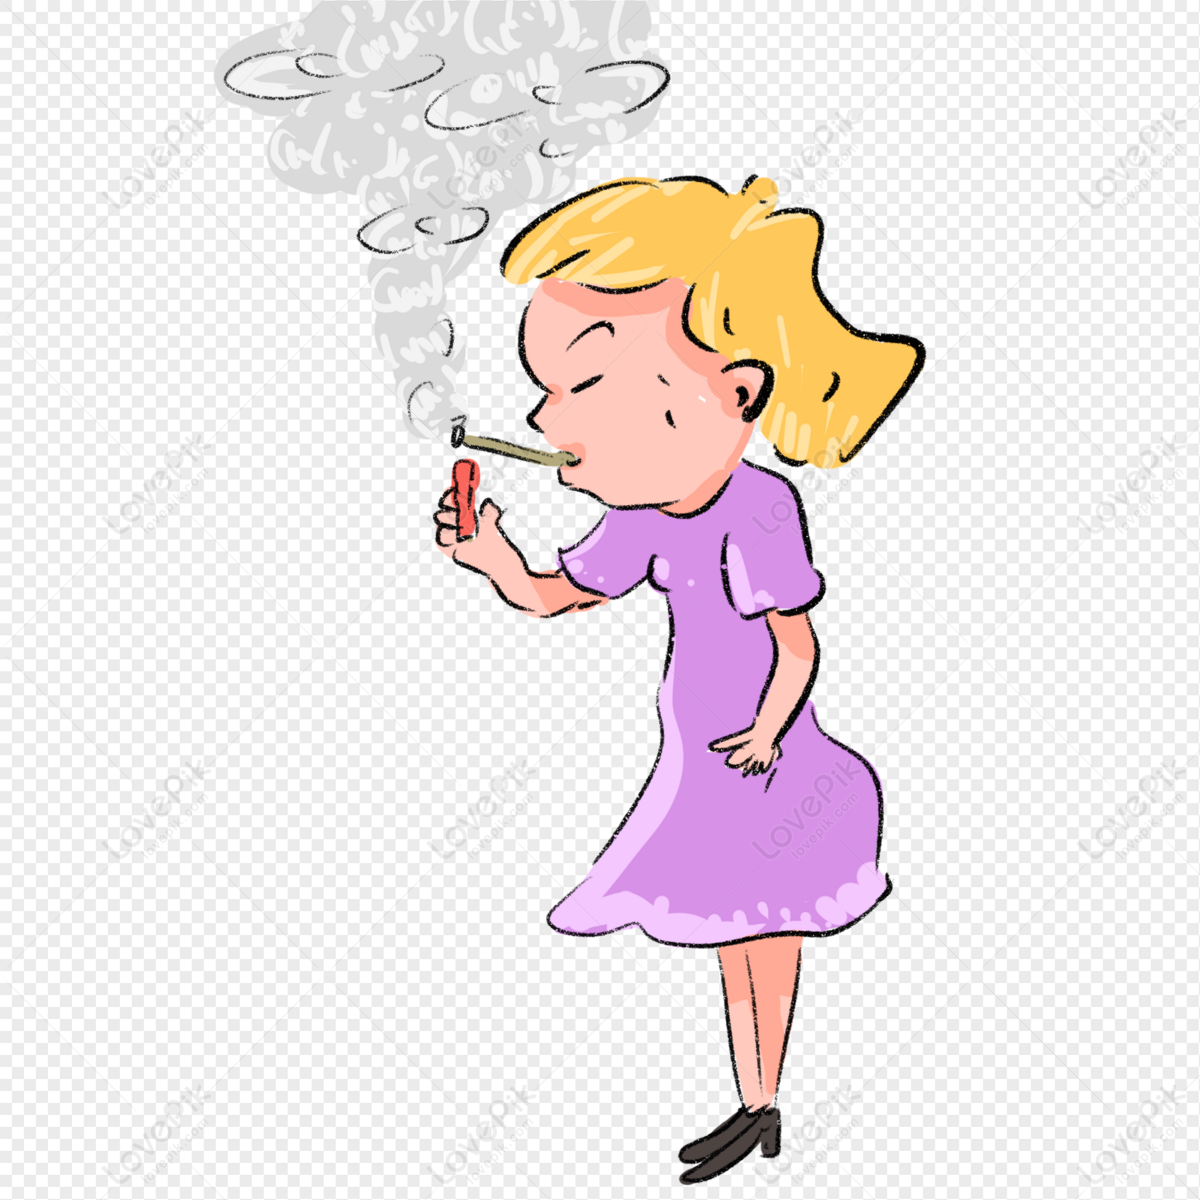 Girl Smoking Cartoon PNG Free Download And Clipart Image For Free ...